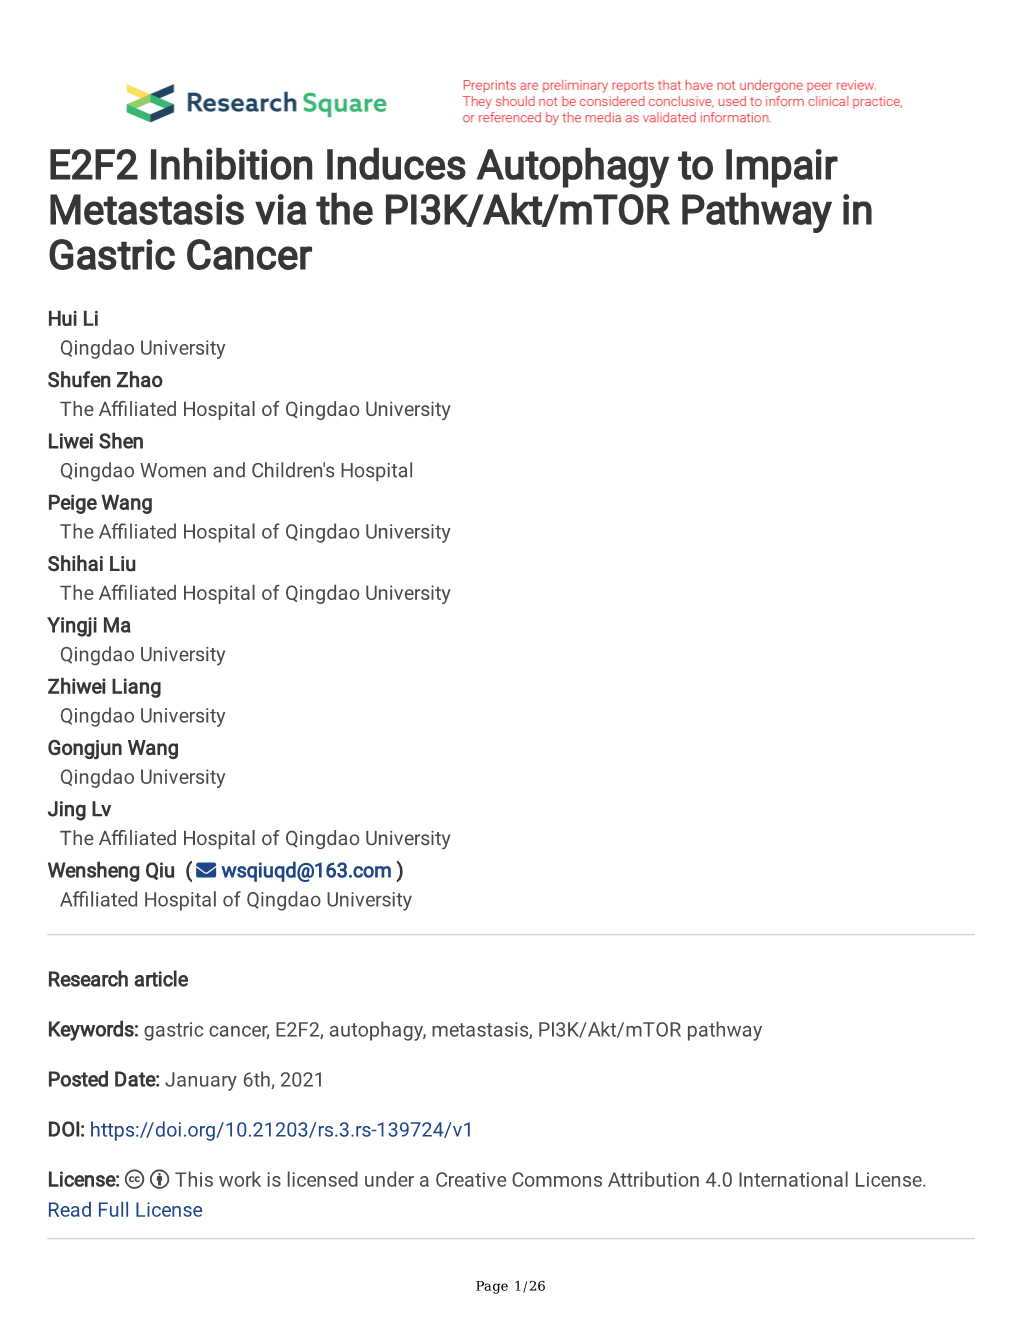 E2F2 Inhibition Induces Autophagy to Impair Metastasis Via the PI3K/Akt/Mtor Pathway in Gastric Cancer